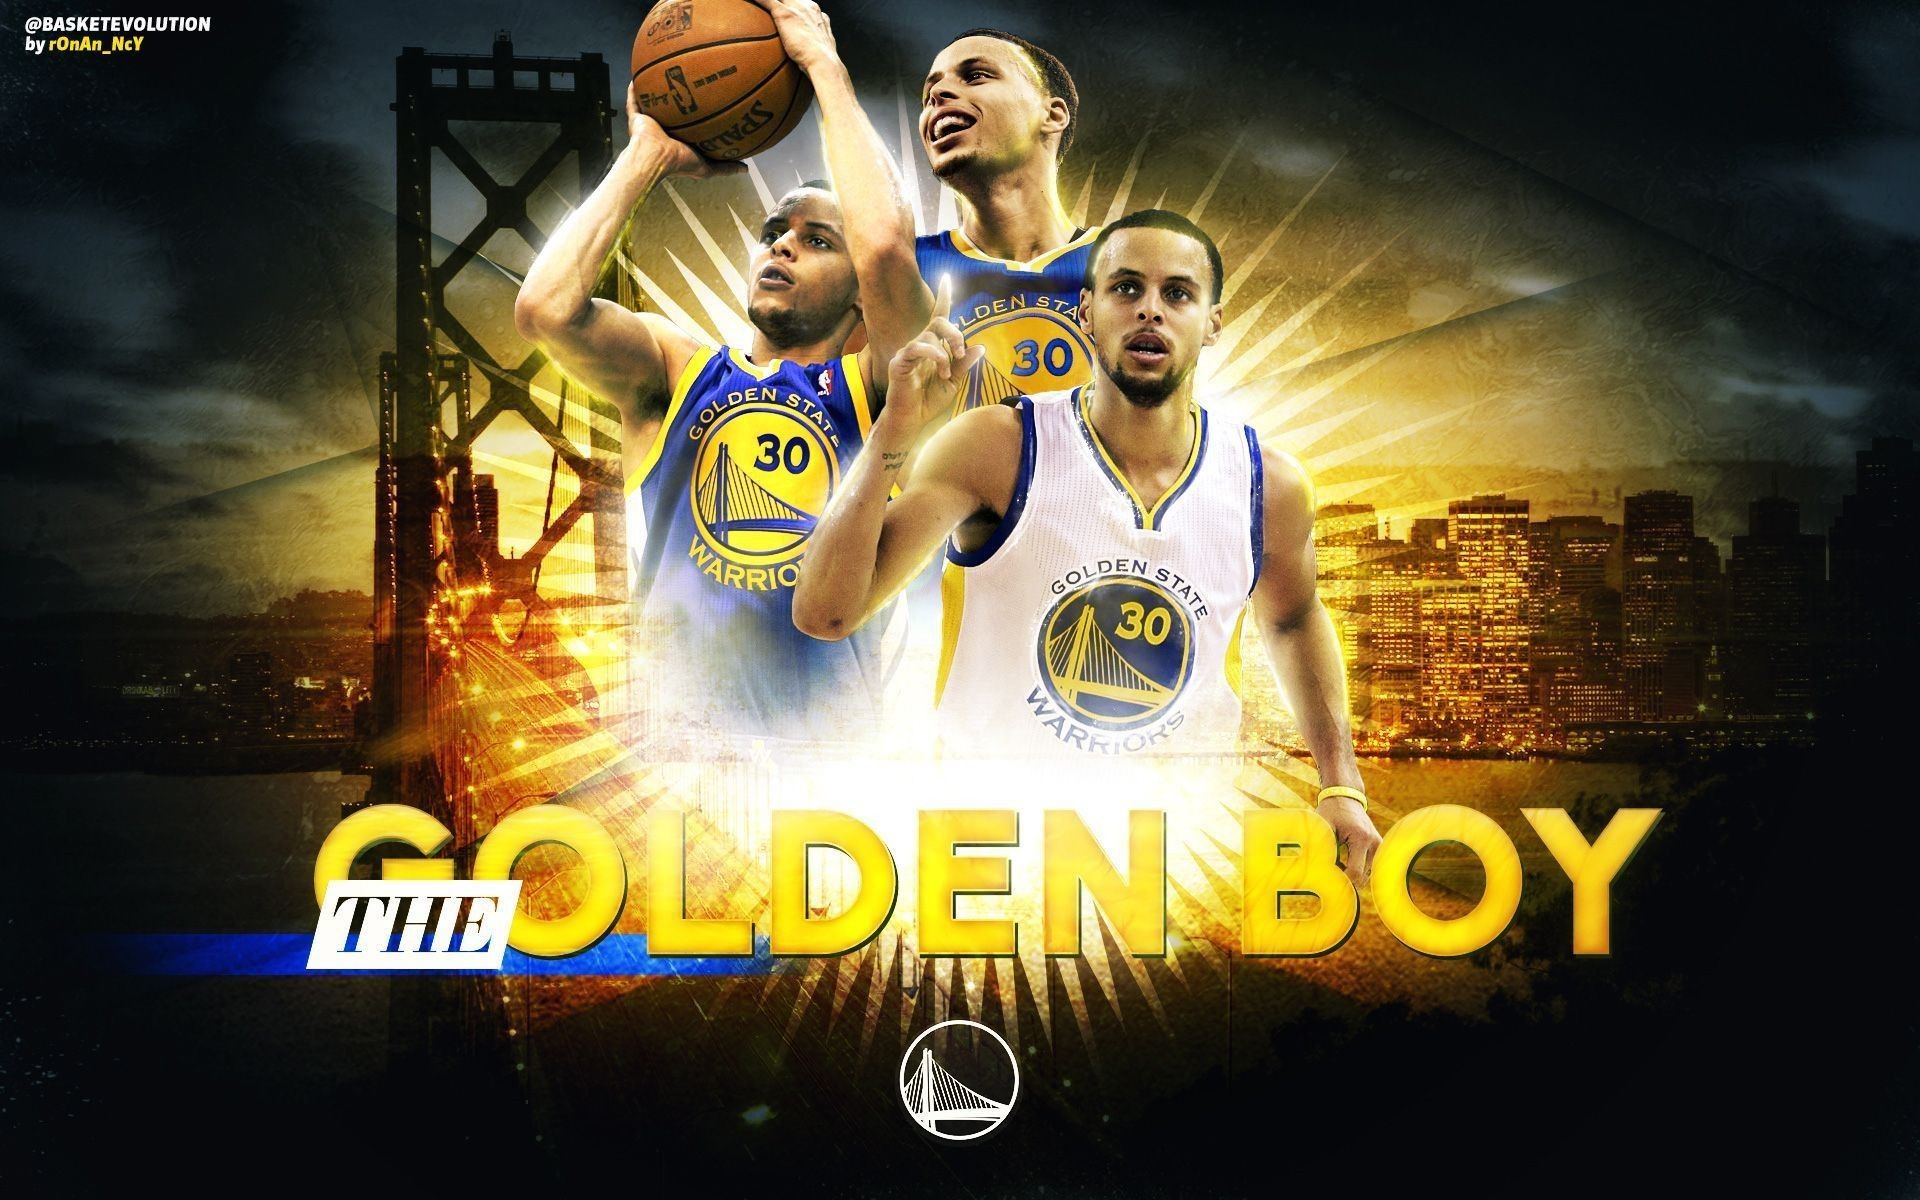 Stephen Curry Fire Wallpaper background picture